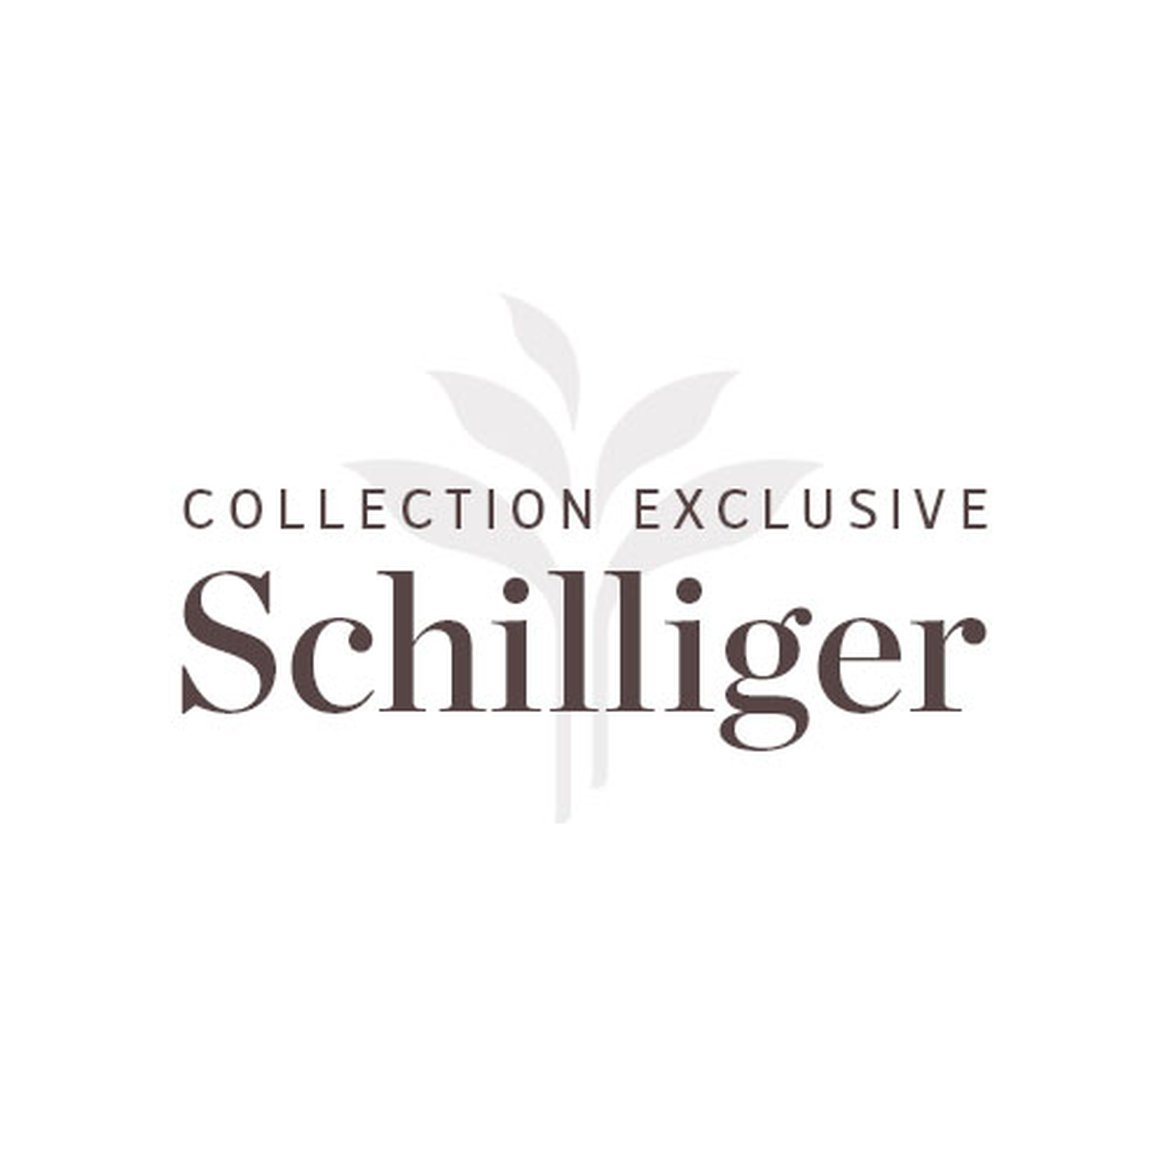 Collection exclusive Schilliger